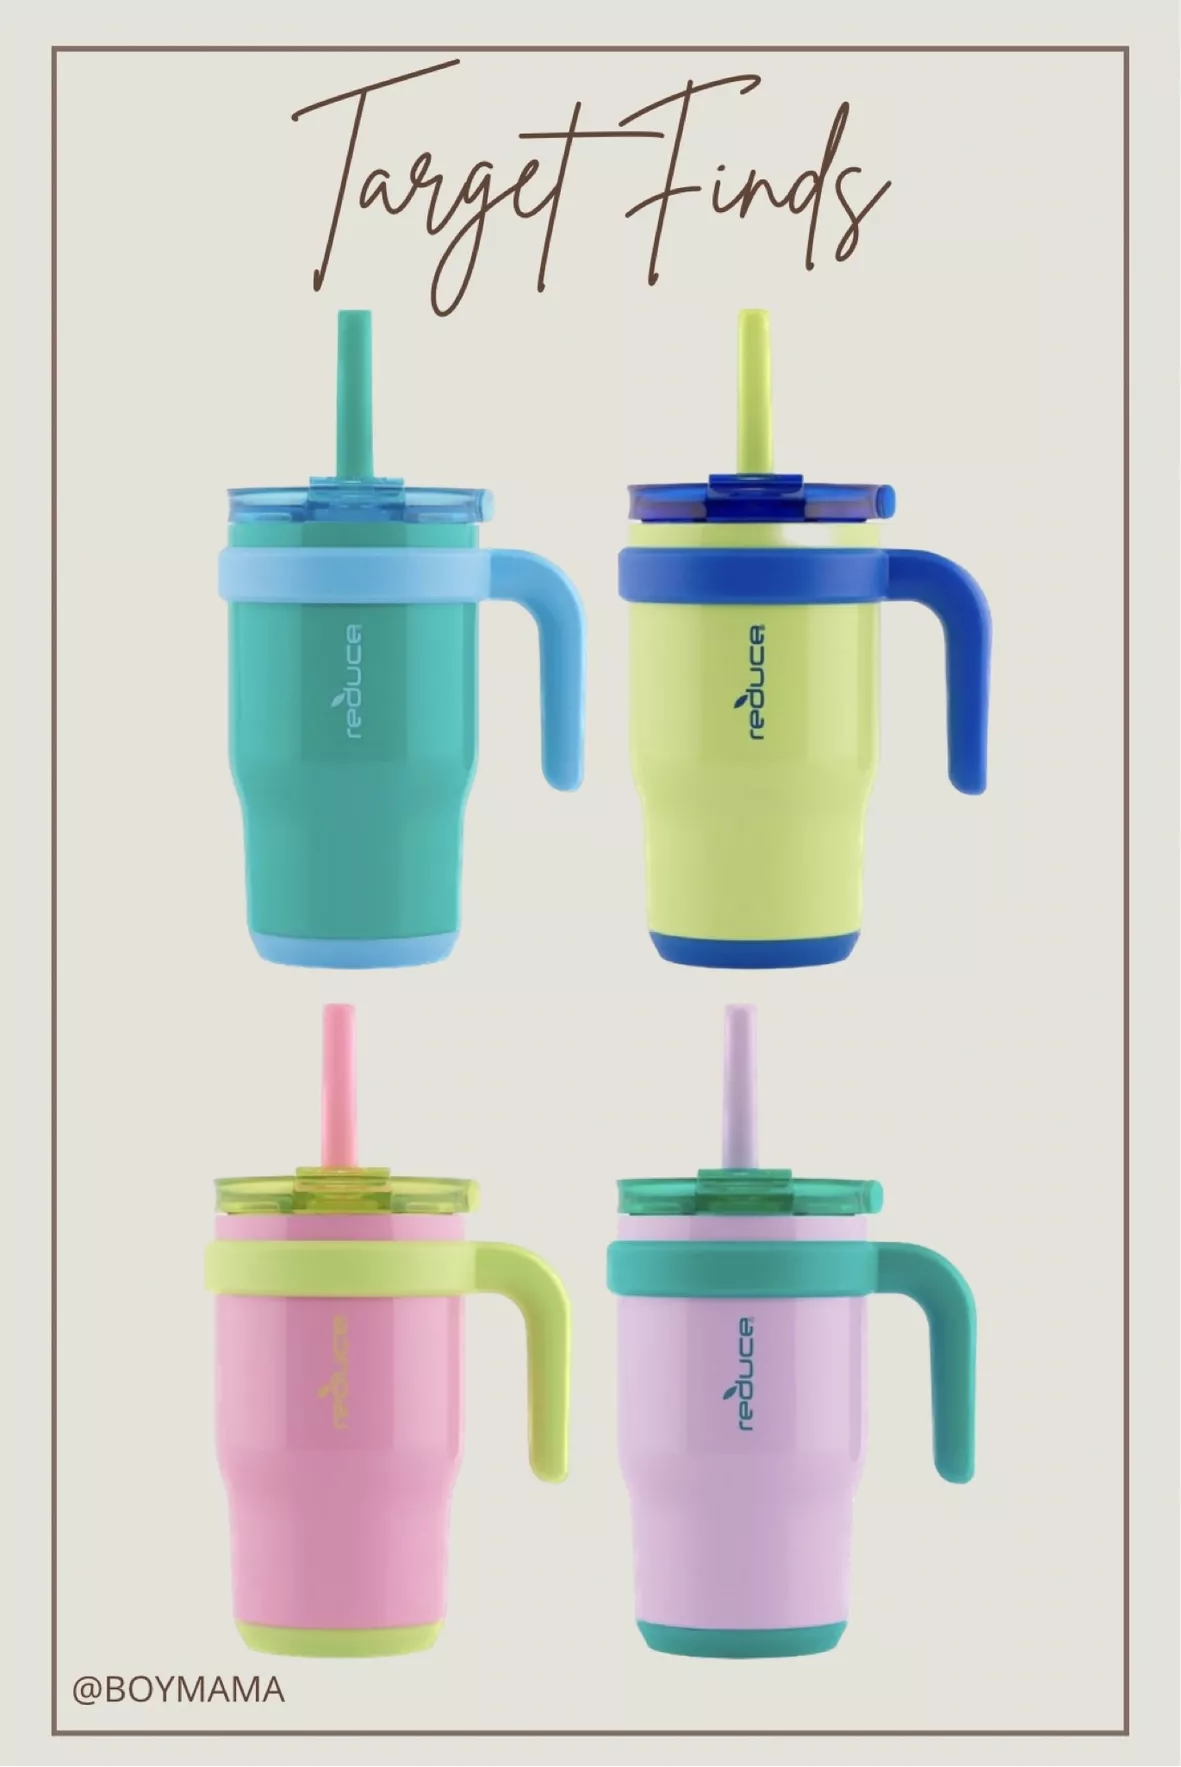 Reduce Coldee 14oz Tumblers with Handles, 2-pack